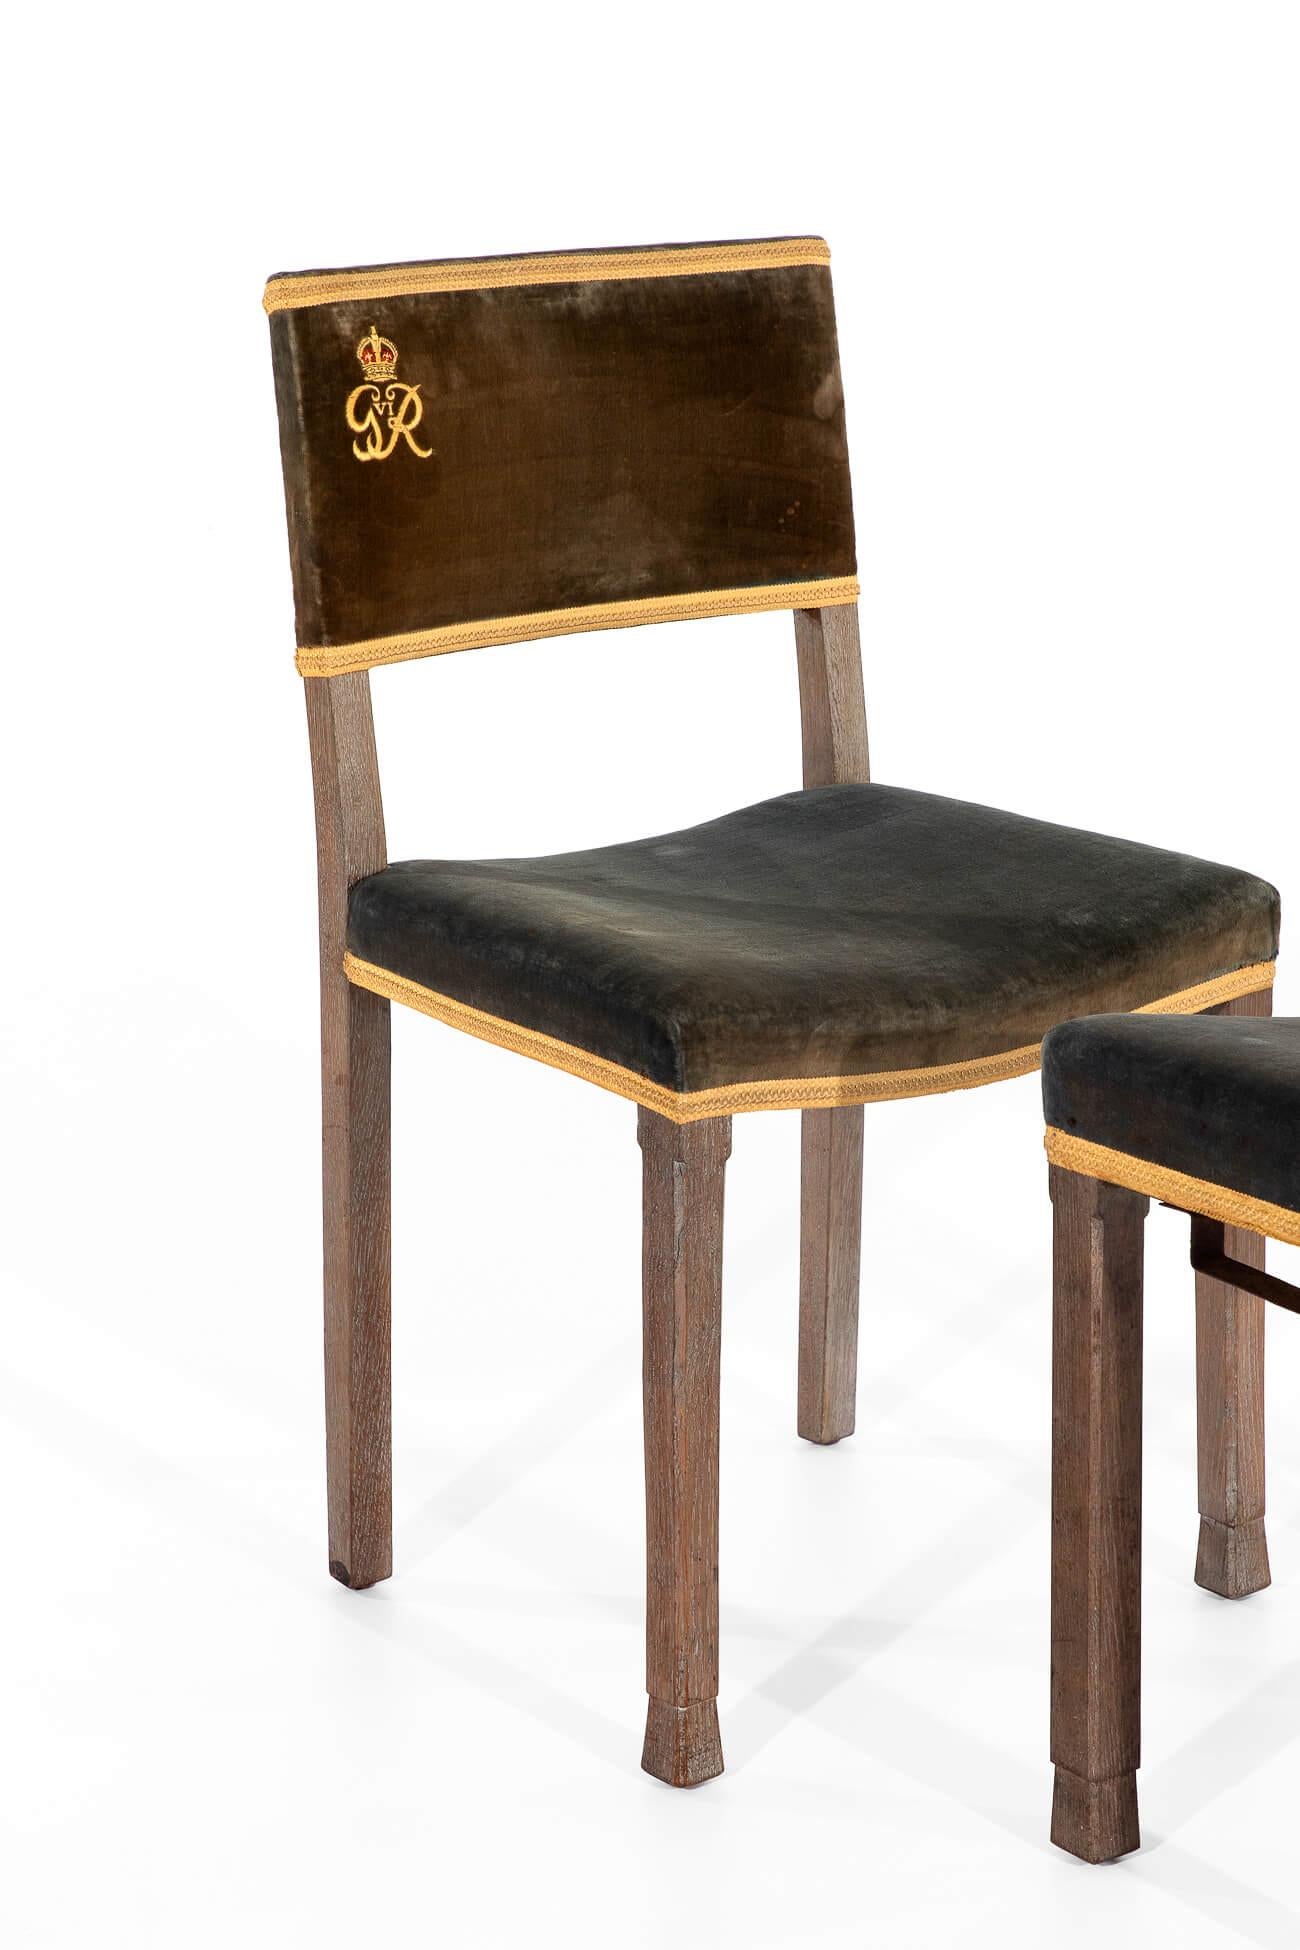 A George VI 1937 Coronation Chair and Stool For Sale 1